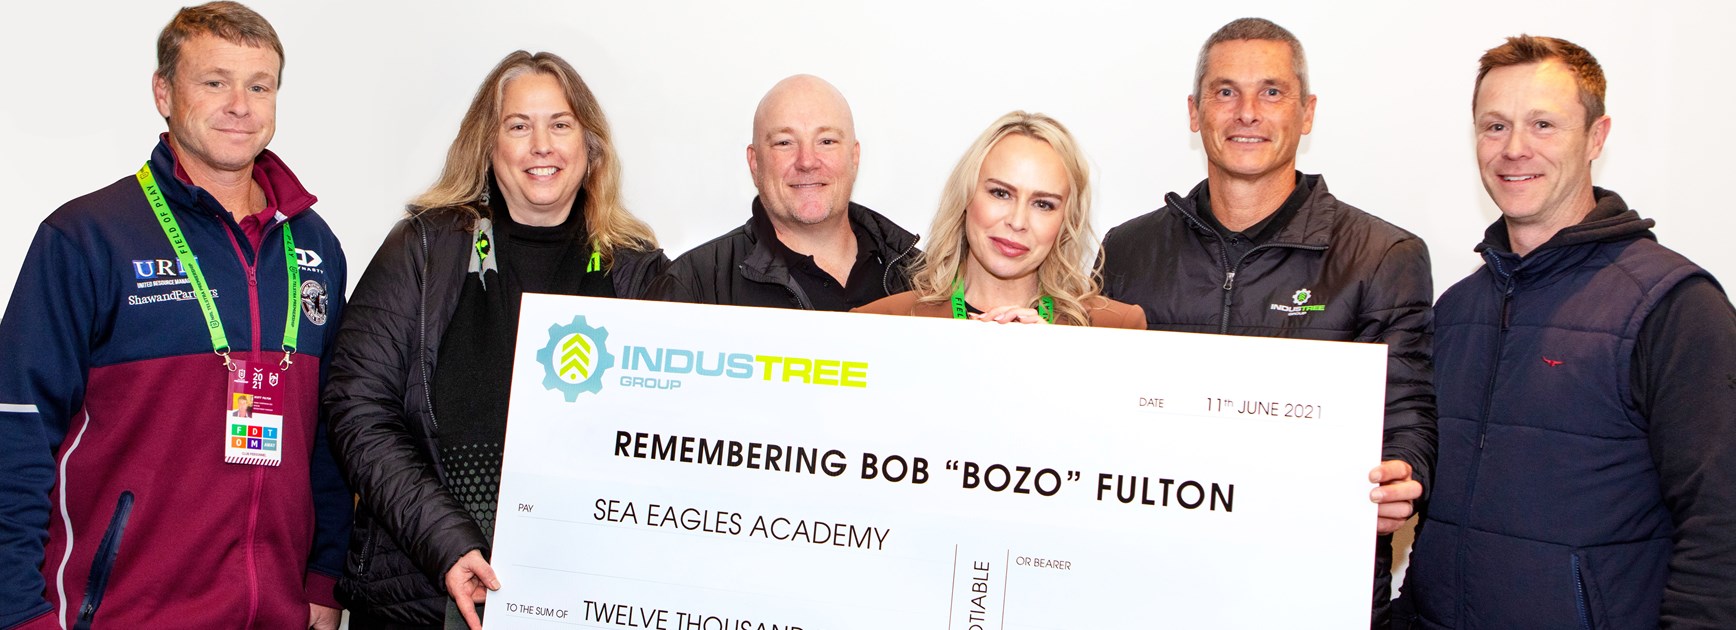 Industree Group makes generous donation in honour of Bob Fulton